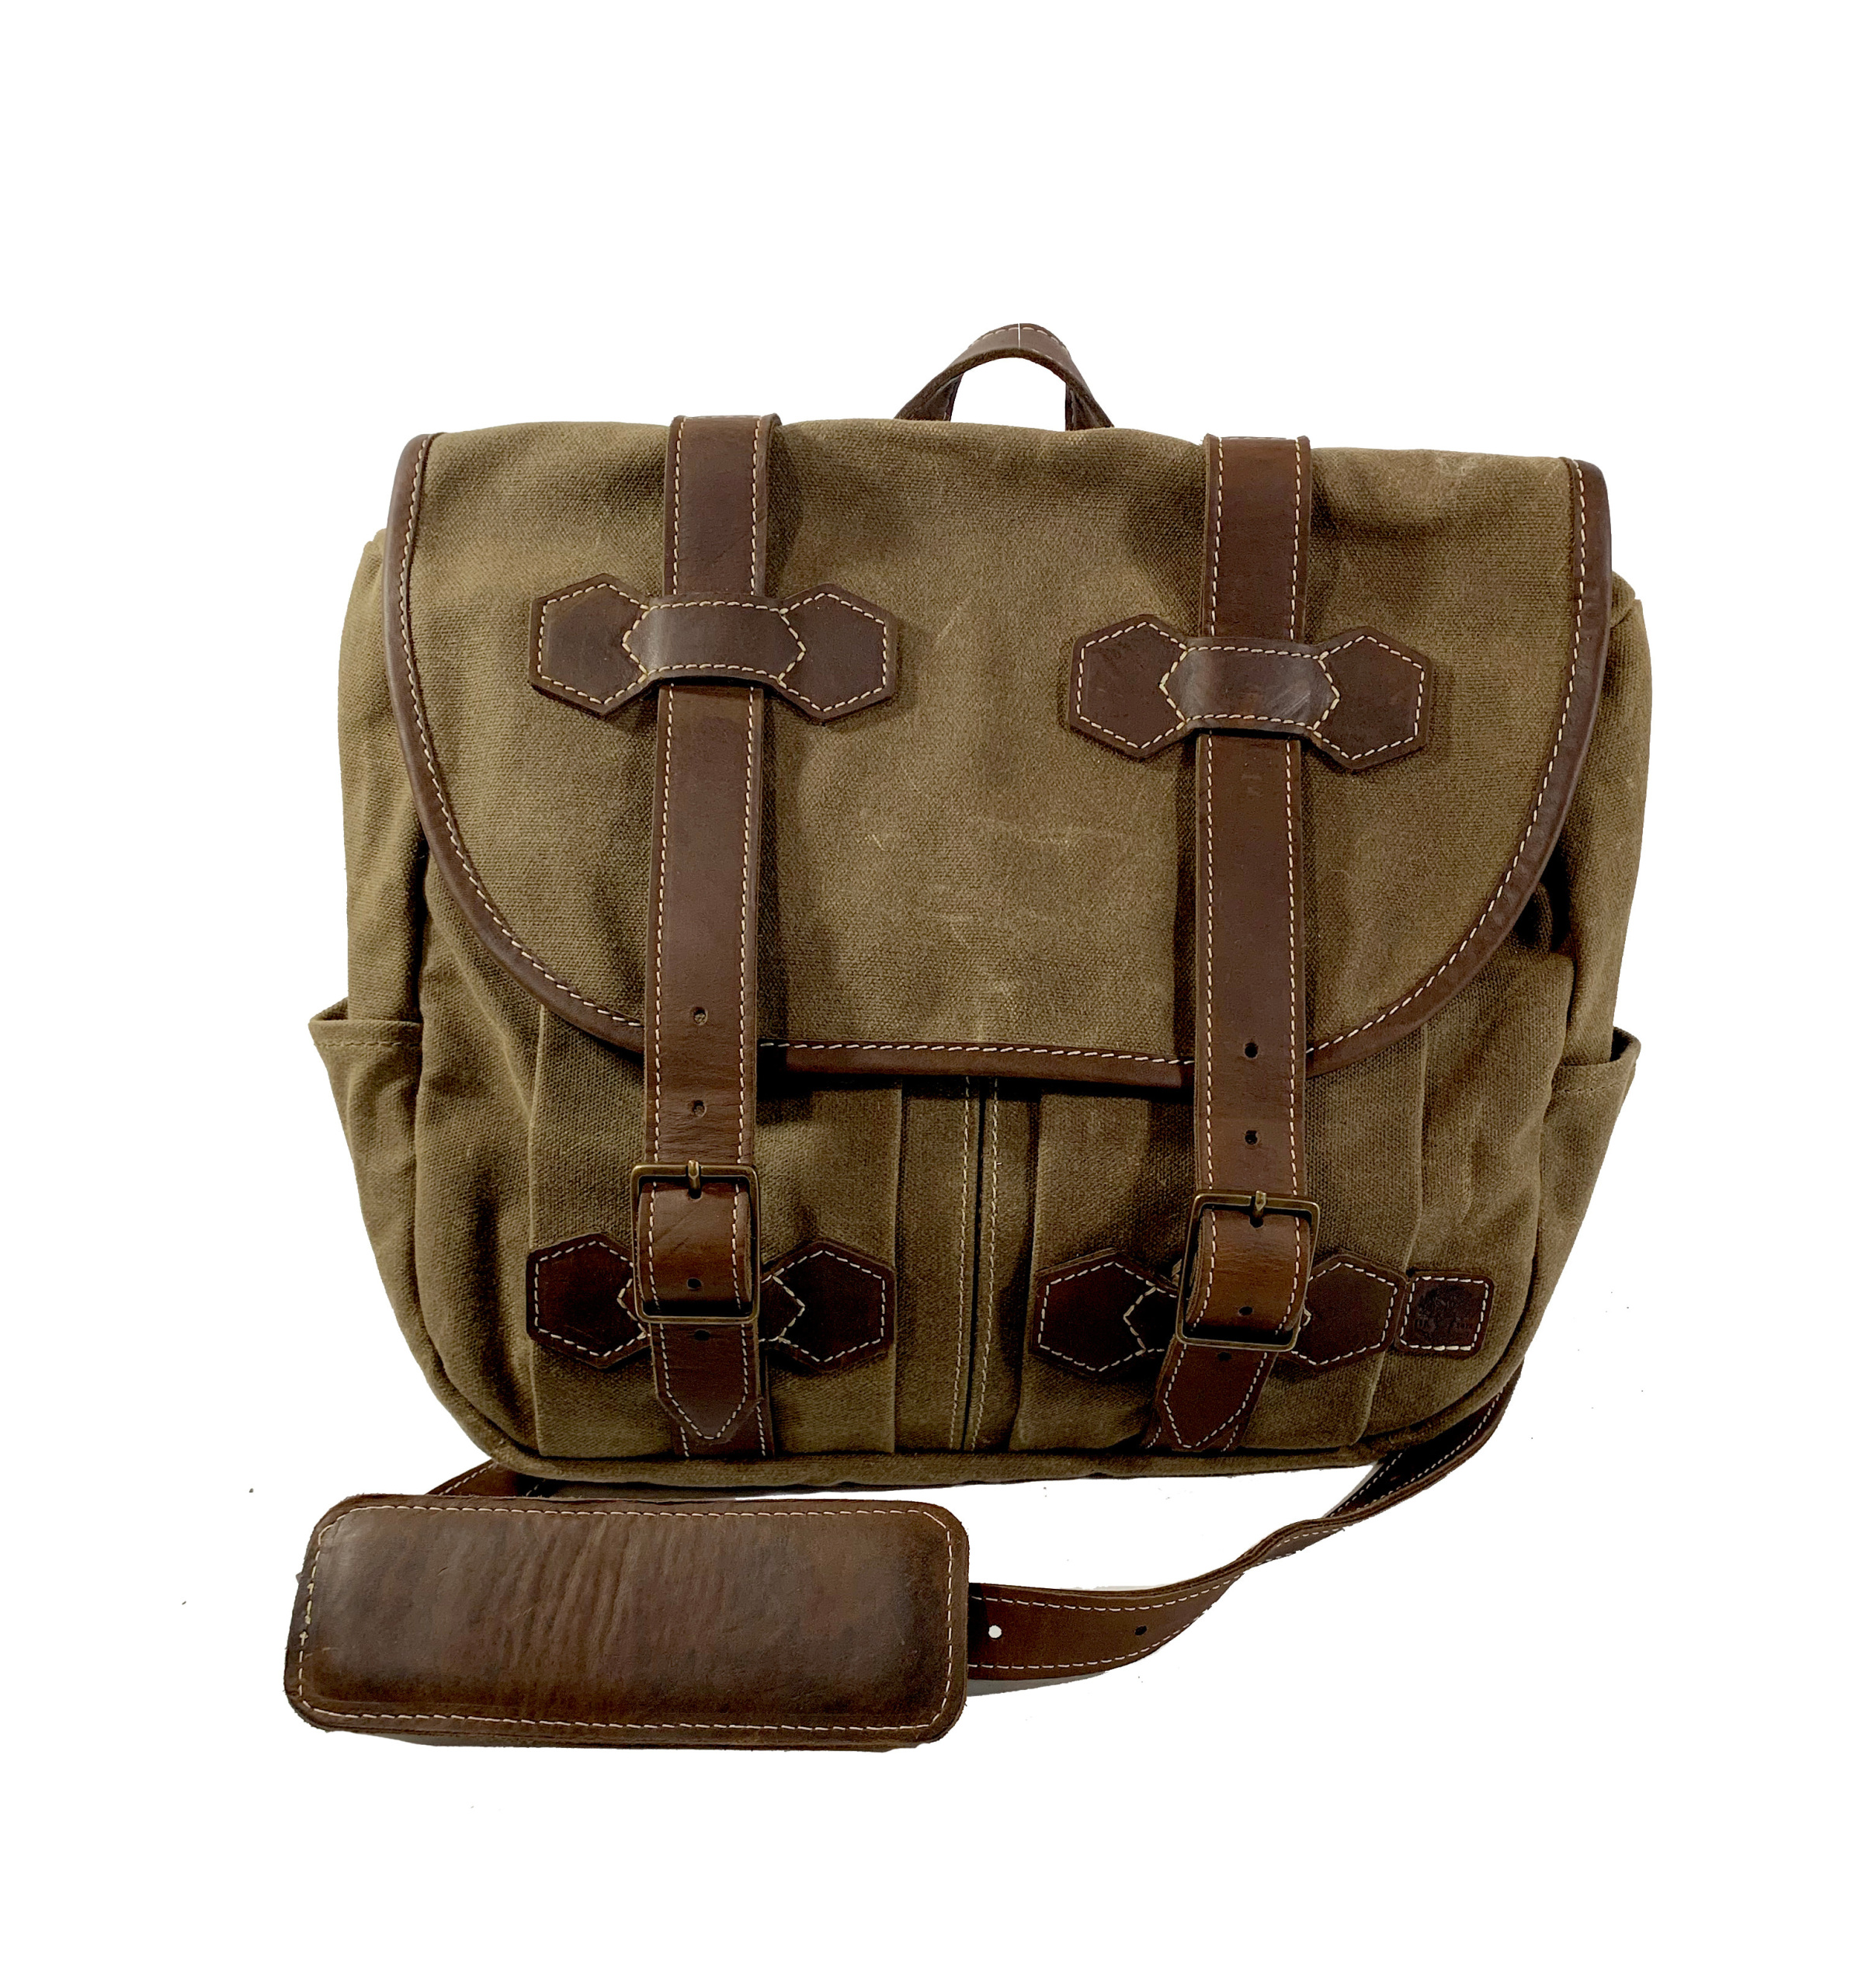 Campaign Waxed Canvas Messenger Bag | The Art of Mike Mignola